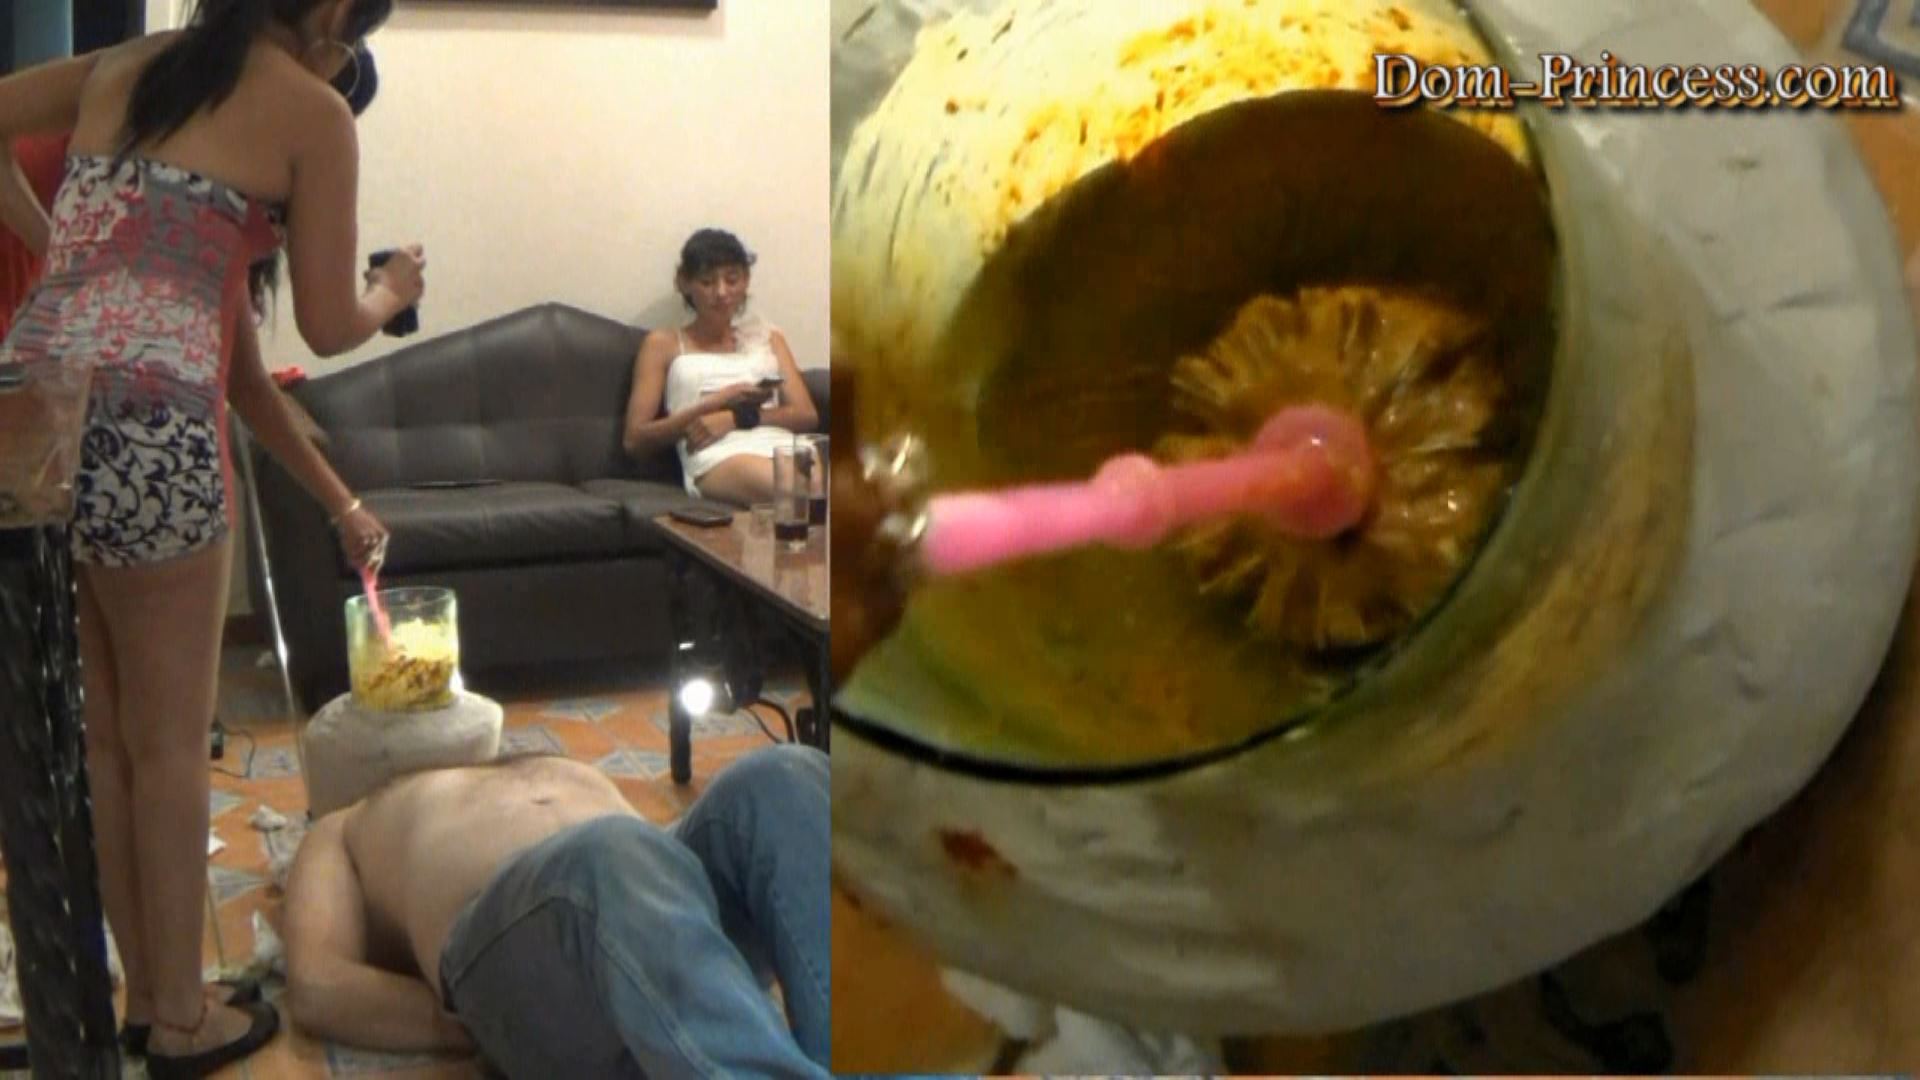 [DOM-PRINCESS] The Poop Collector Part 06 The Feeding [FULL HD][1080p][WMV]